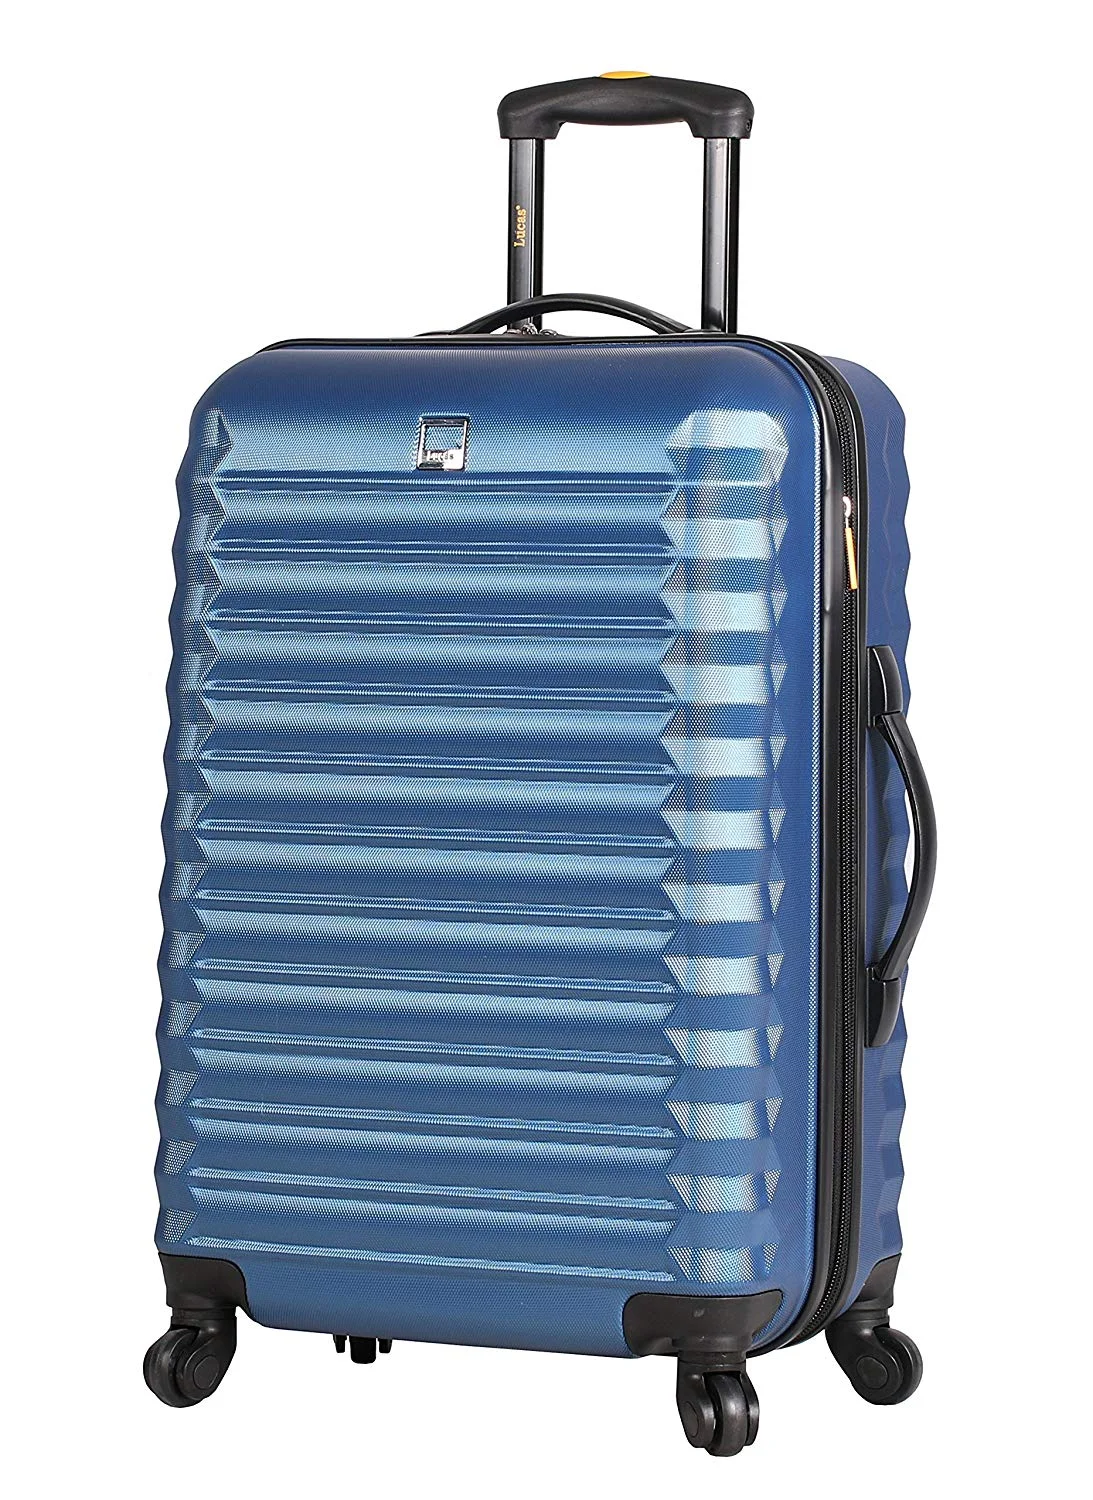 Lucas + Ultra Lightweight Expandable Large Suitcase With 4-Spinner